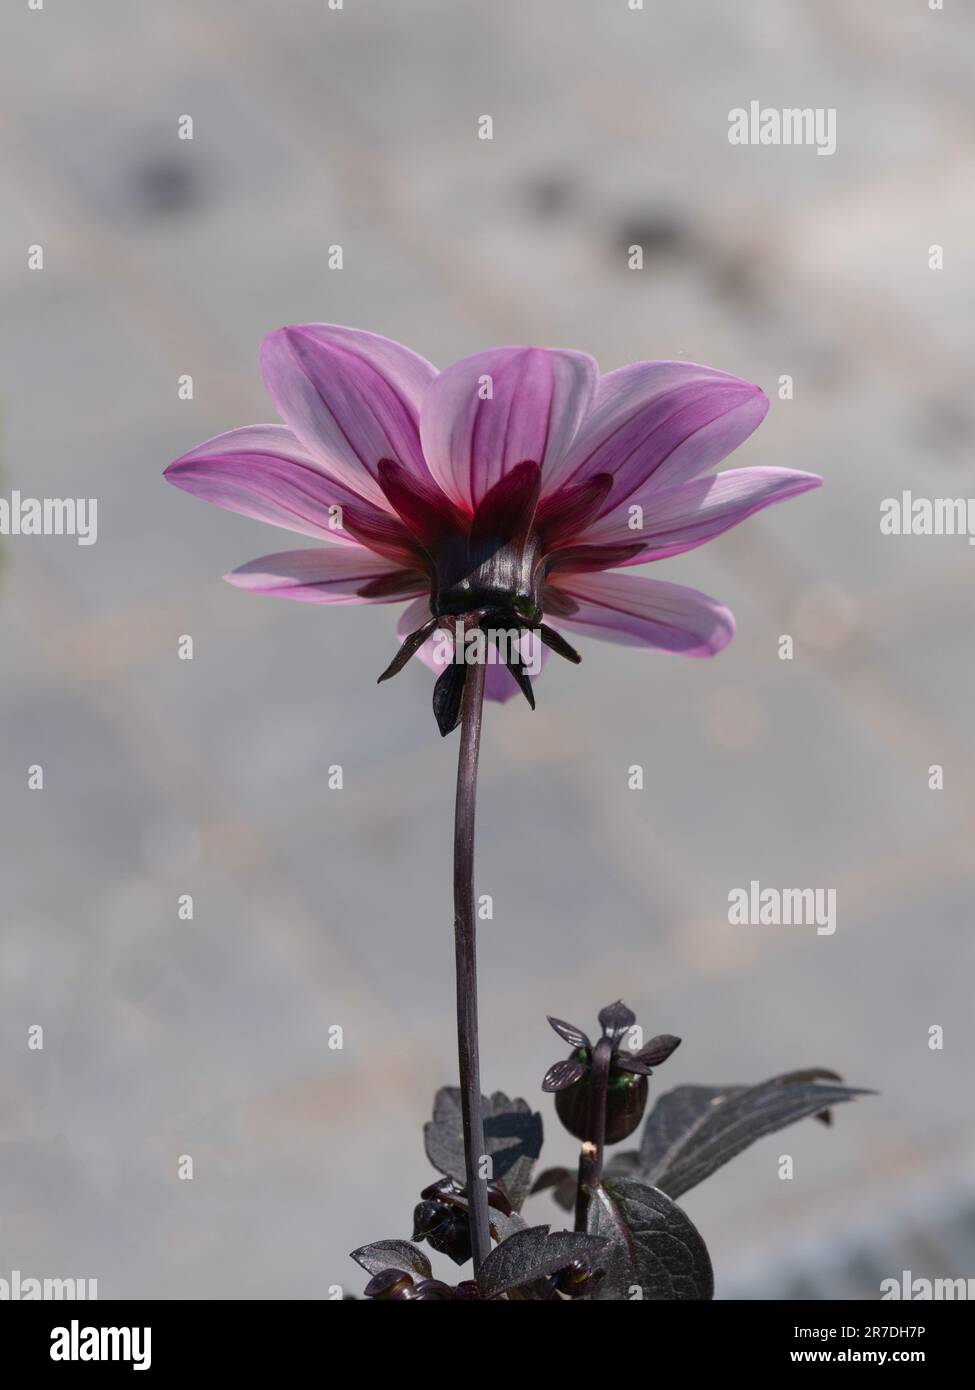 the bottom and back of the flower, Dahlia merckii lehm on a bokeh milky background Stock Photo